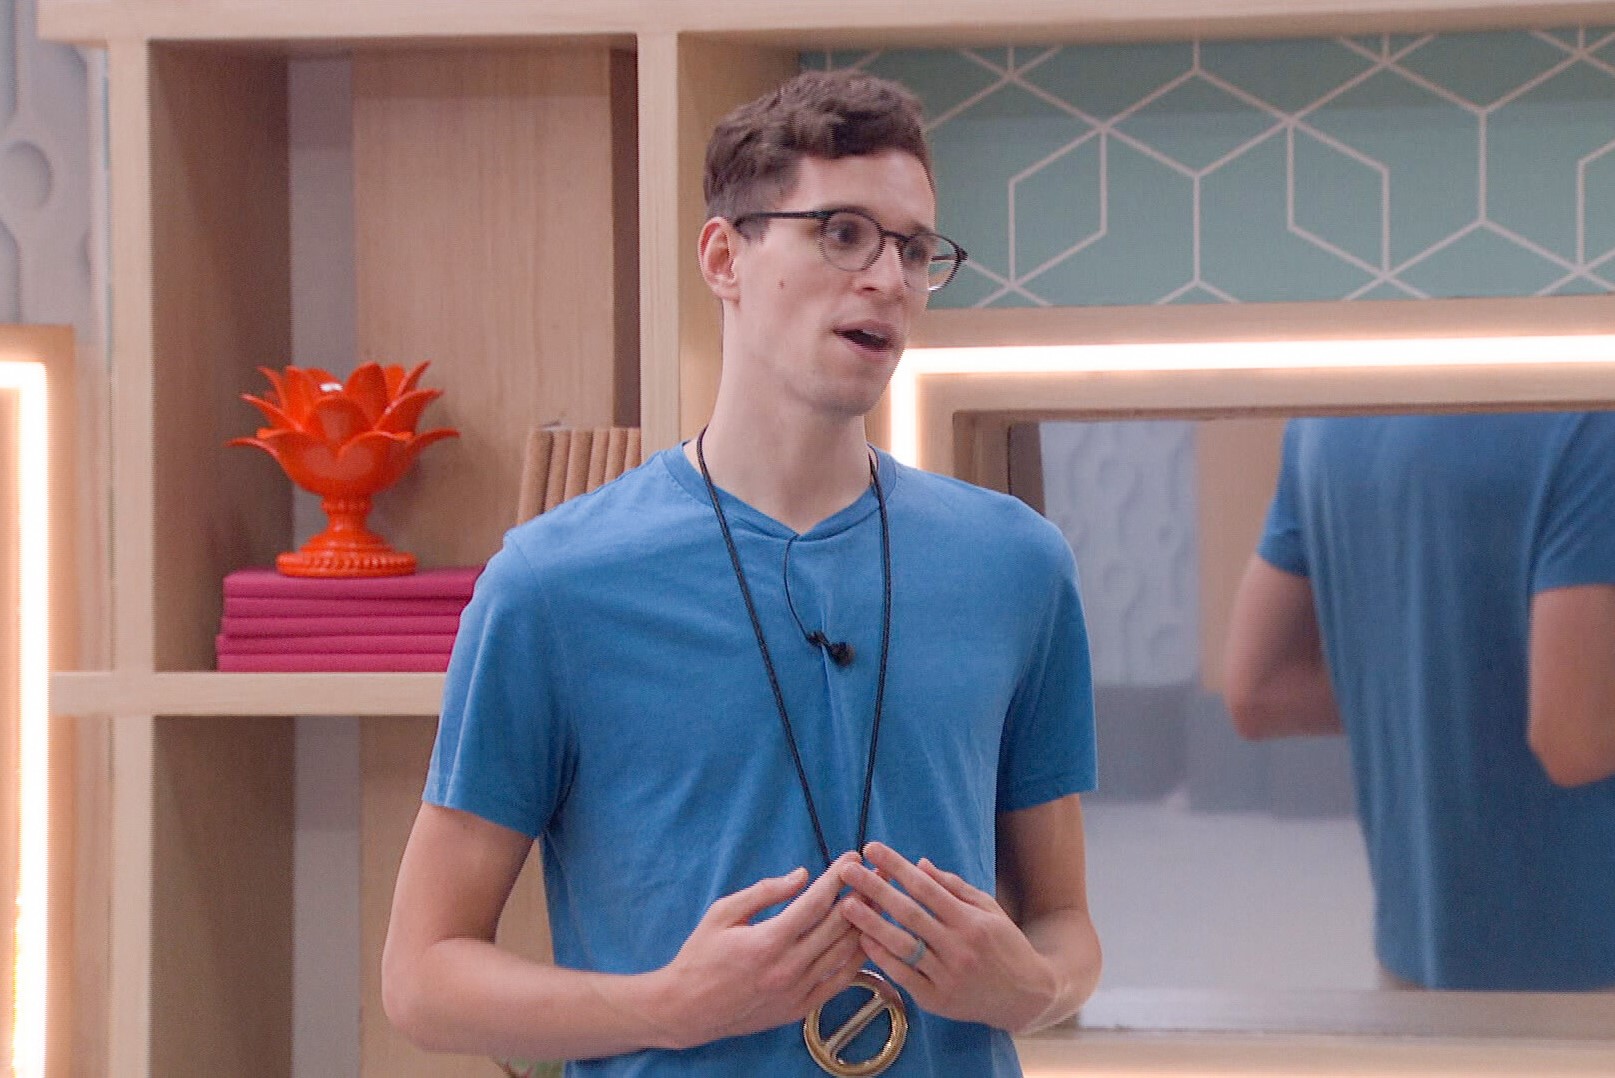 Michael Bruner, who stars in 'Big Brother 24' on CBS, wears a blue shirt and the Power of Veto necklace.